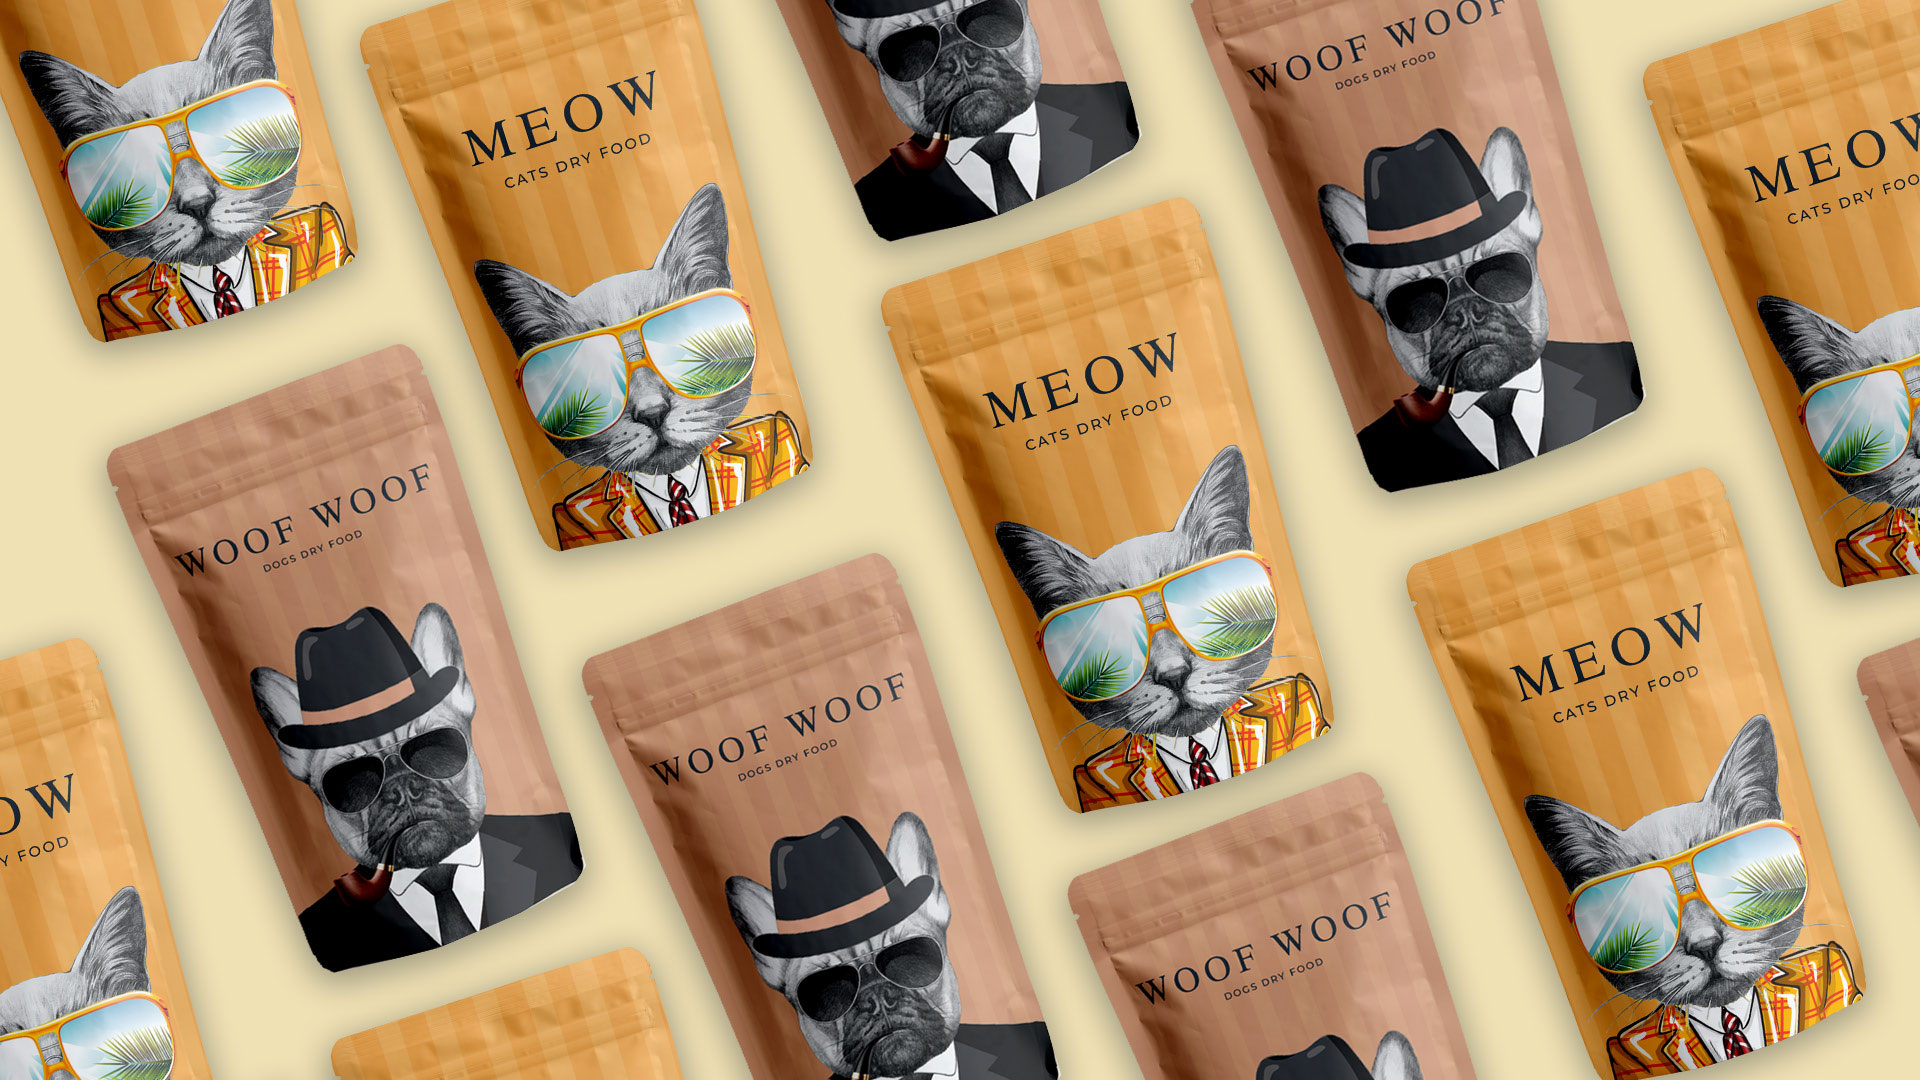 Cats and Dogs Dry Food Product line Brand Identity and Packaging Design